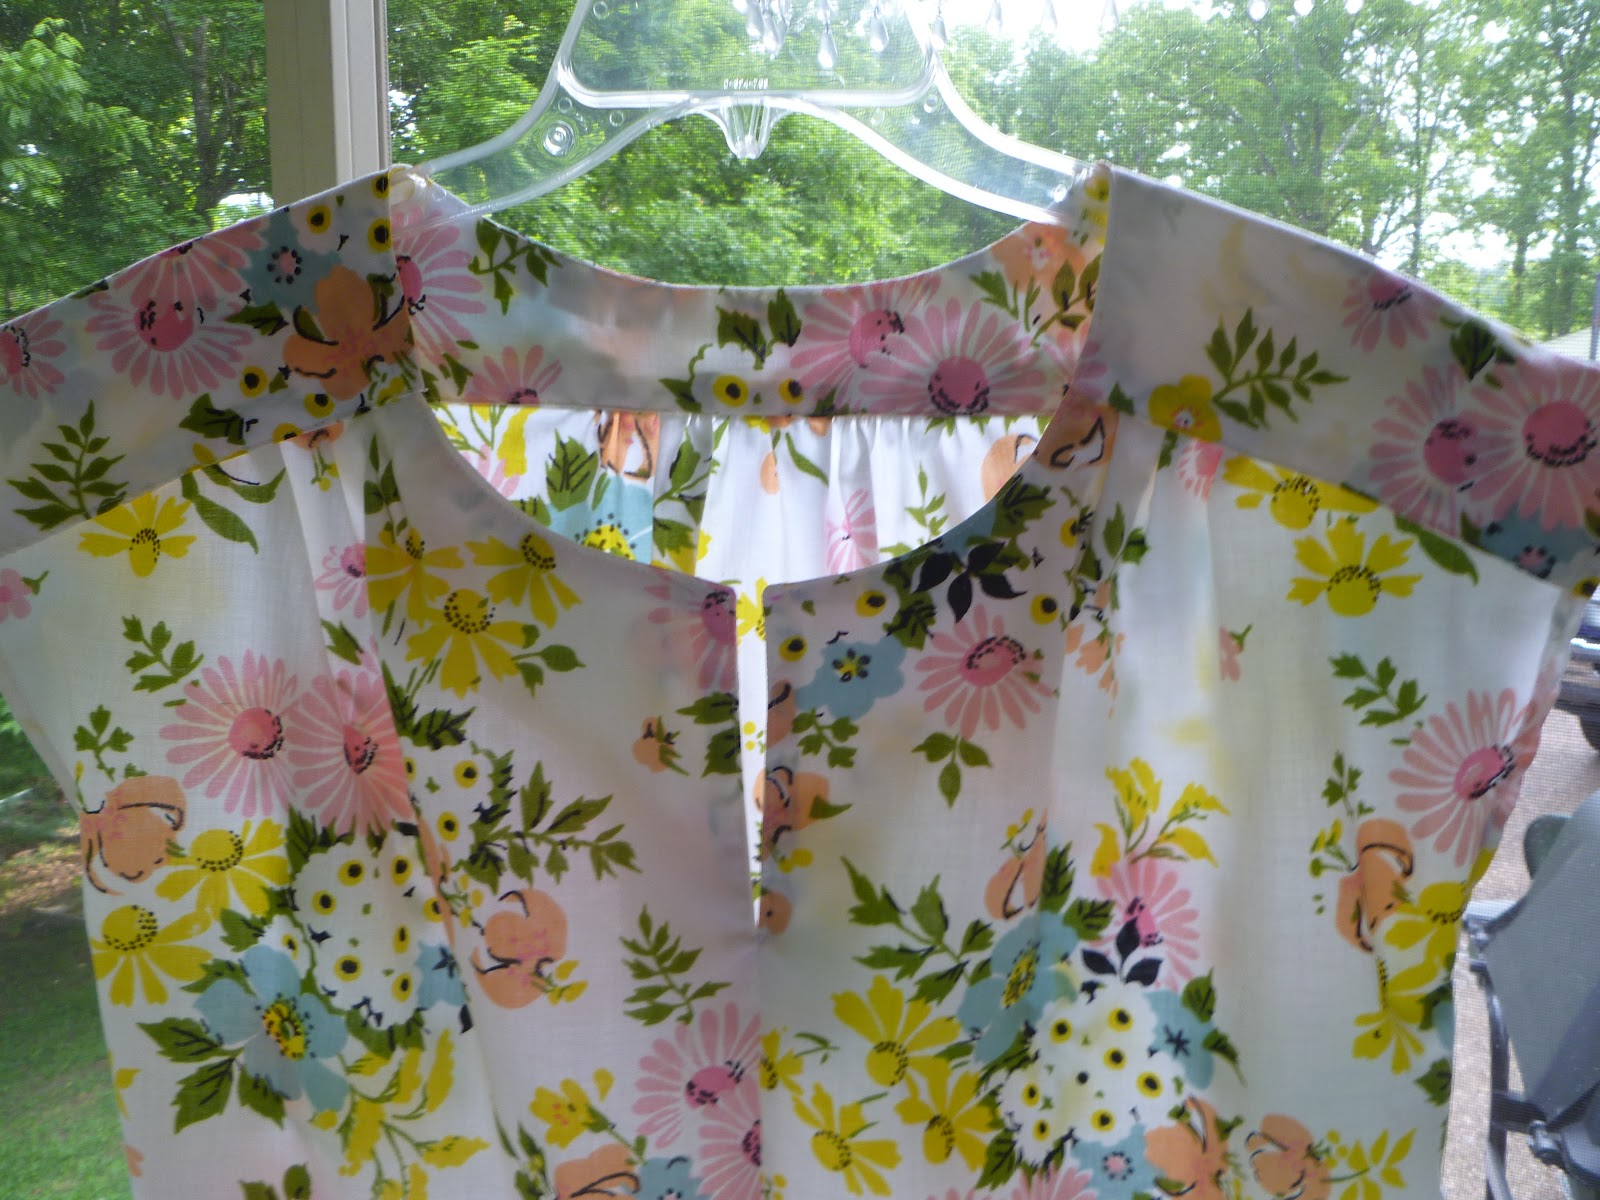 Brenda's Sewing and Crafting Adventures: 2 tops from thrifted sheets